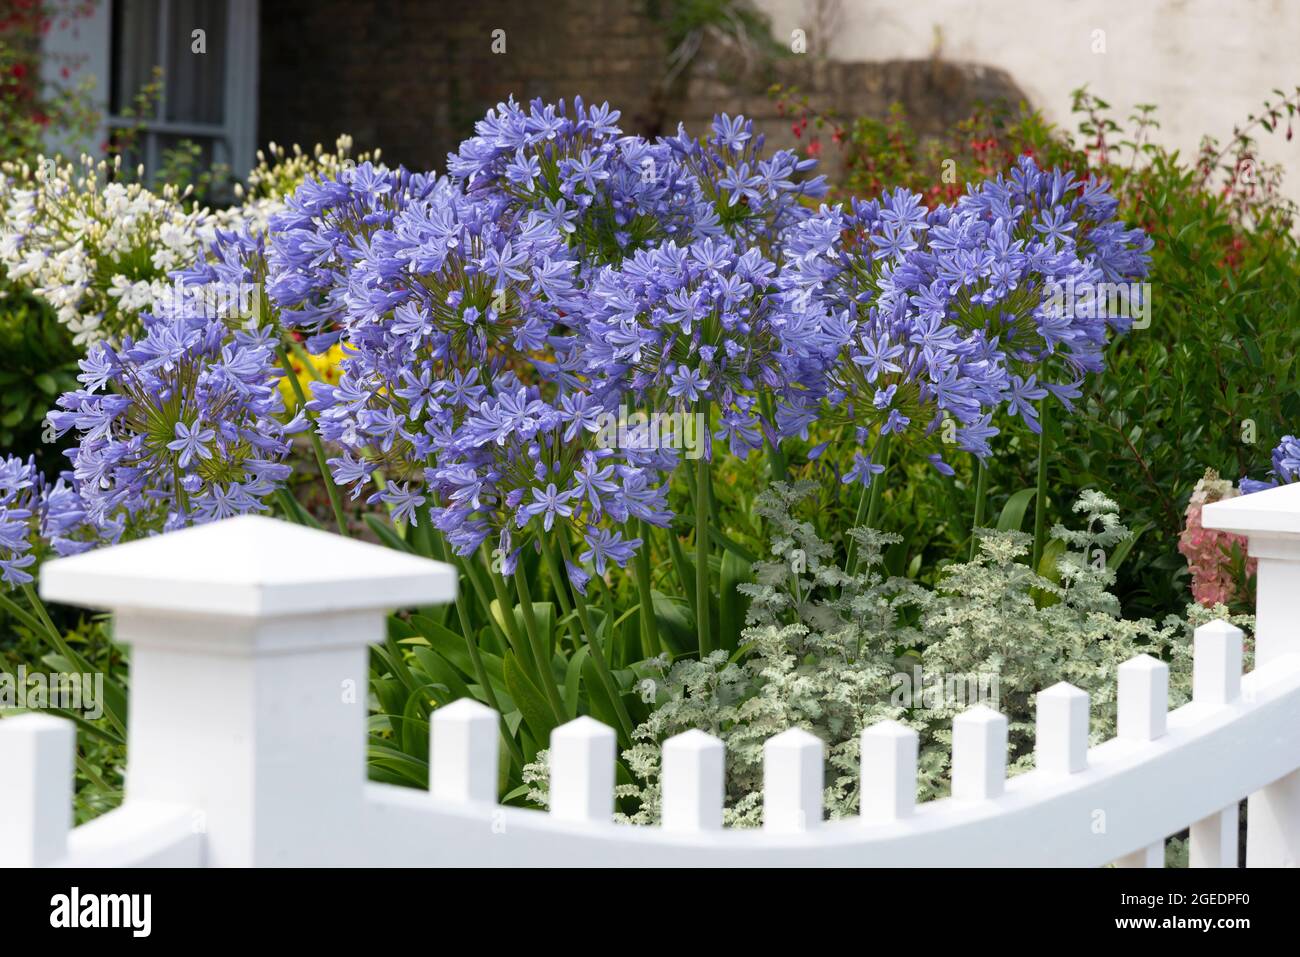 Coastal or seaside garden with blue agapanthus  (agapanthus africanus) in flower on the seafront at Cowes, Isle of Wight, England, UK Stock Photo